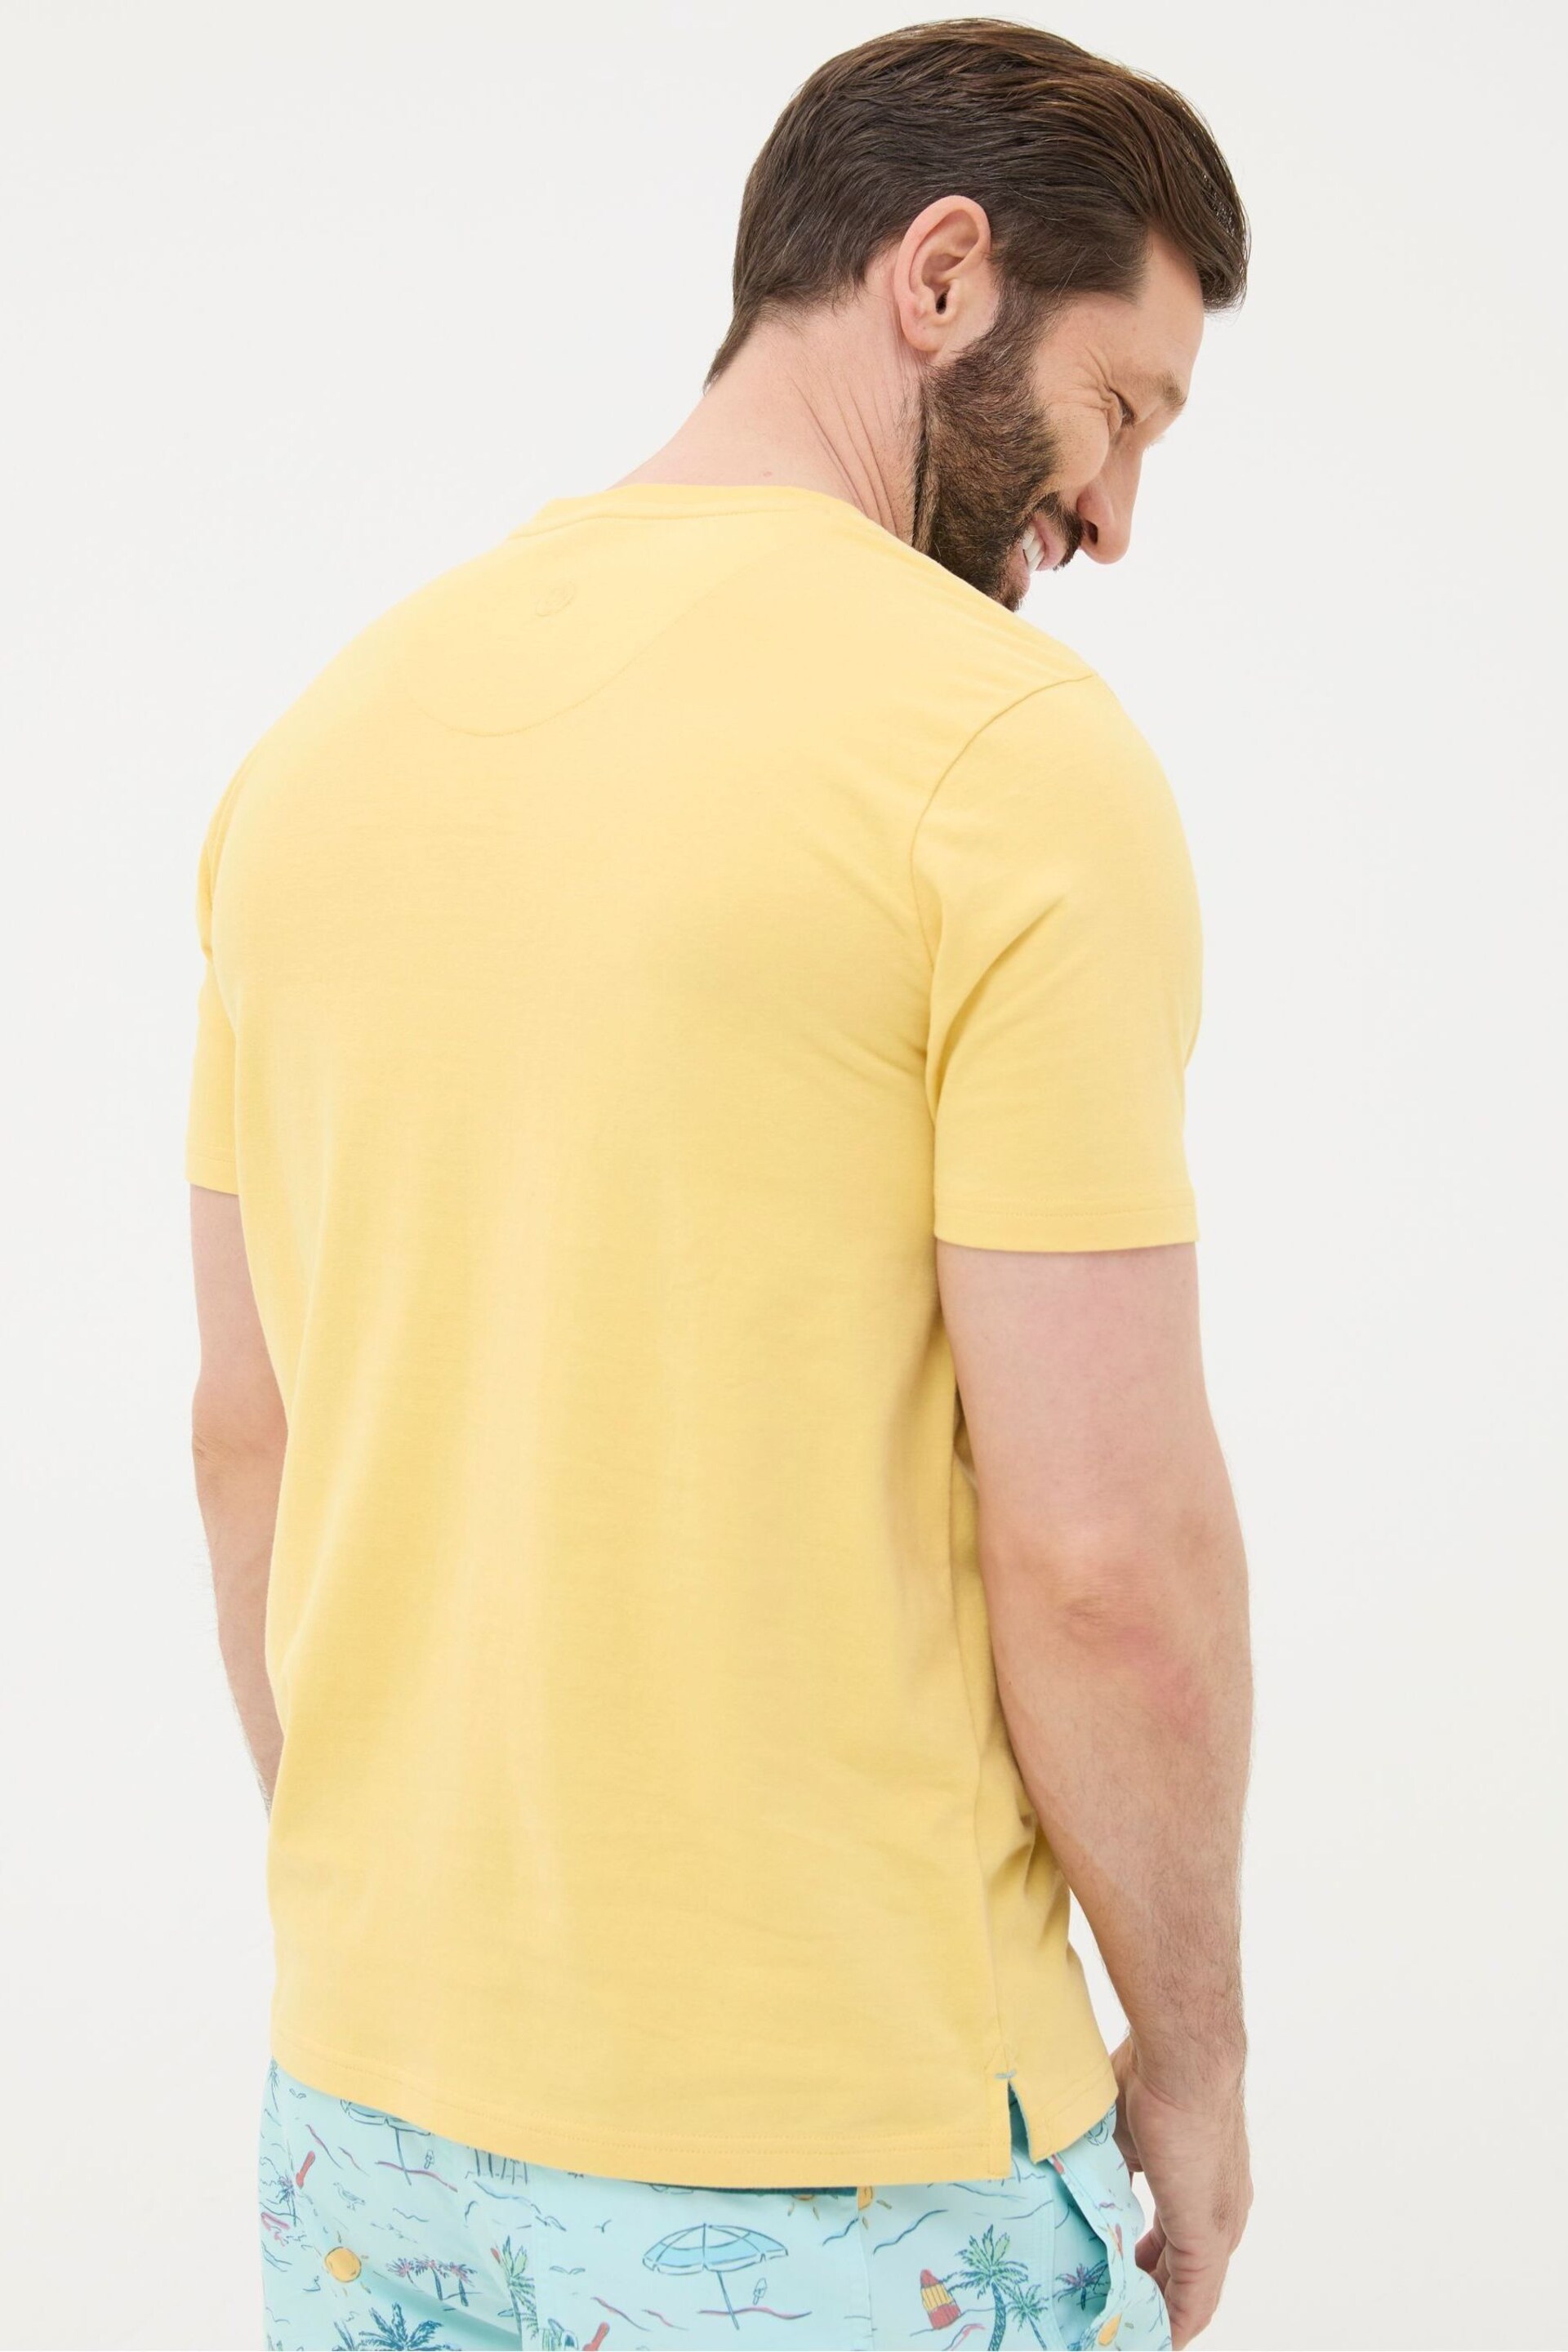 FatFace Yellow Chest Stripe T-Shirt - Image 2 of 5